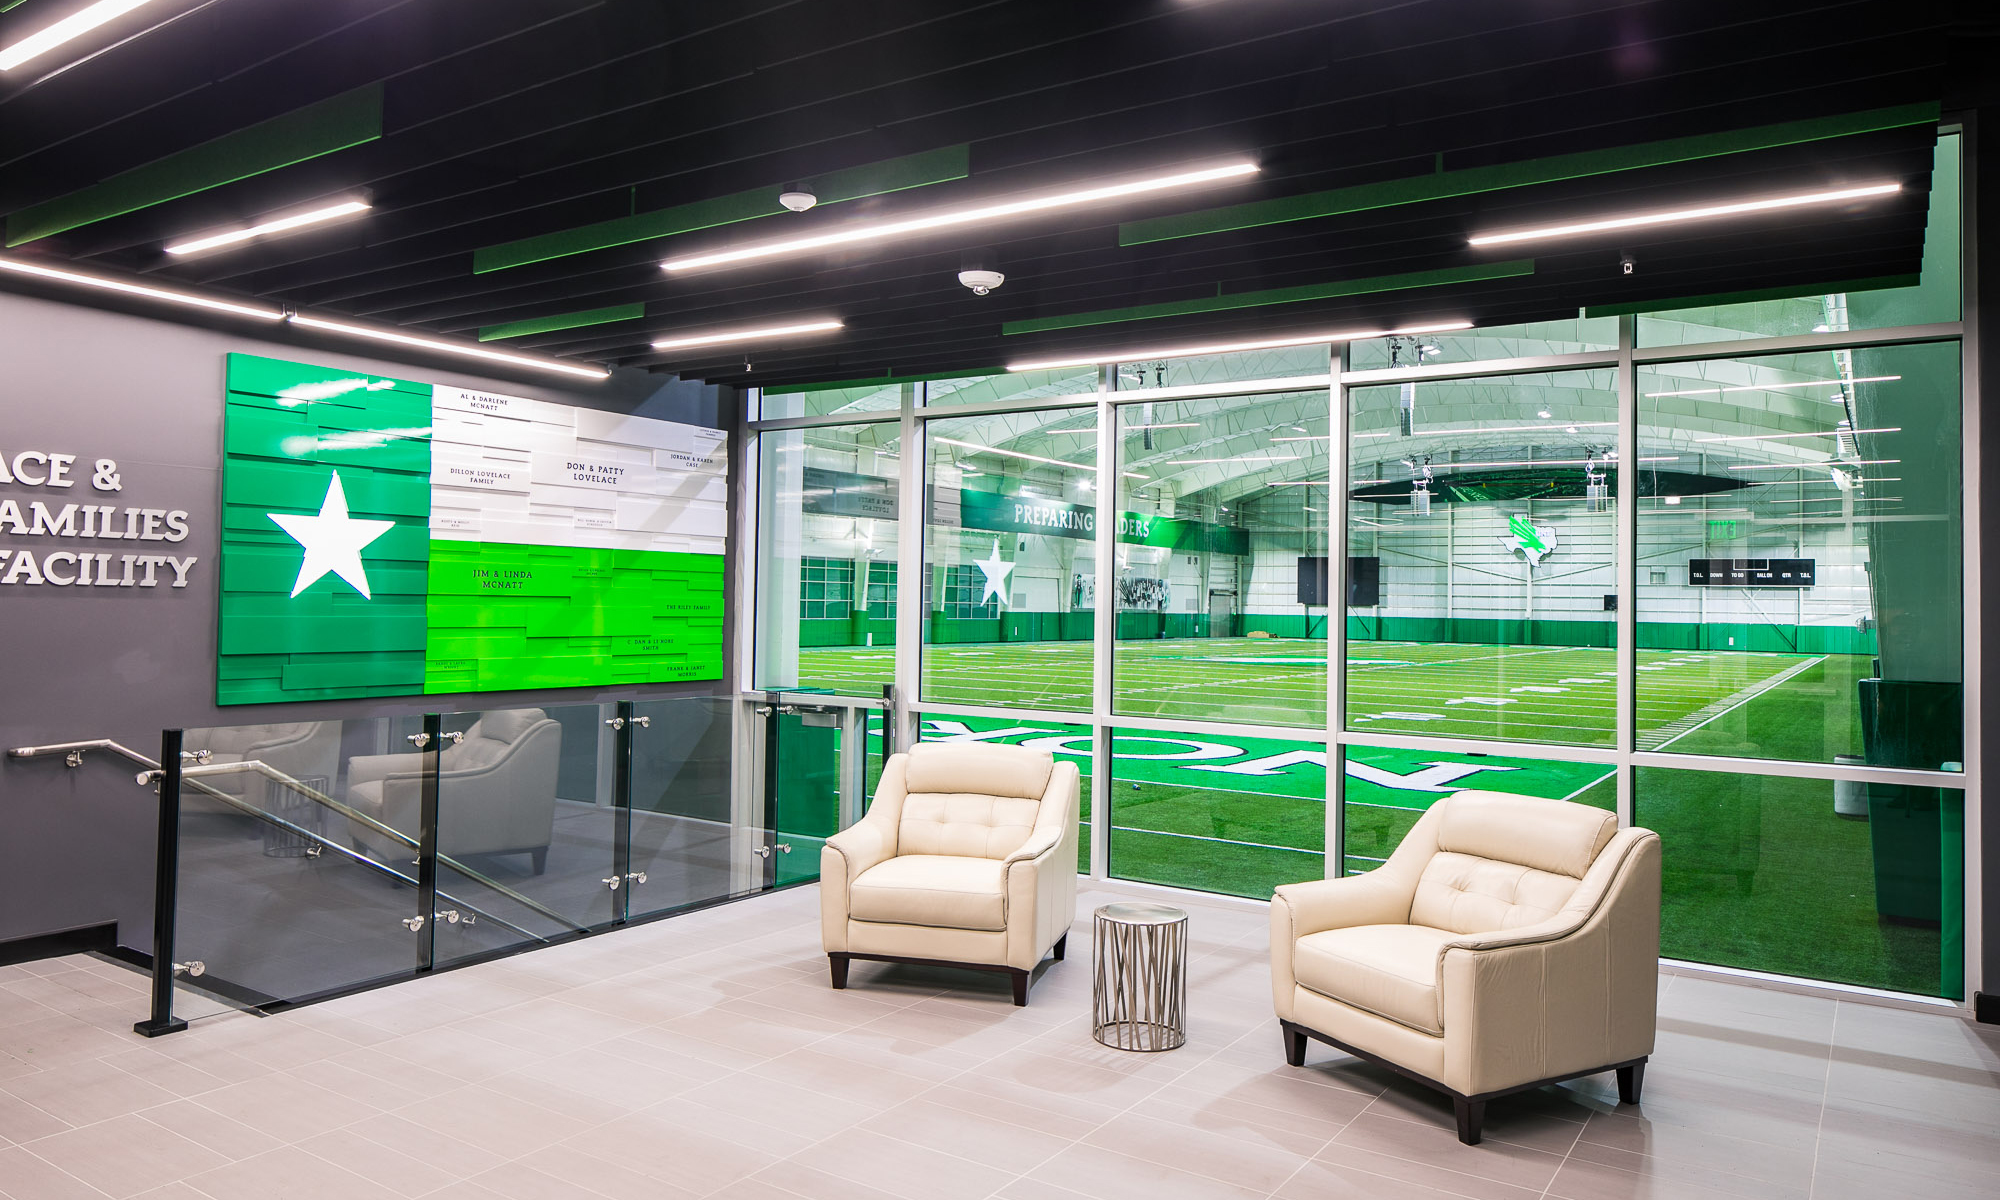 <p>Along with storage space, restrooms, and filming/viewing platforms, the facility also includes an entry lobby with team displays and an adjacent alumni/recruiting lounge with soft seating, a kitchenette, and a view to the practice field.</p>
